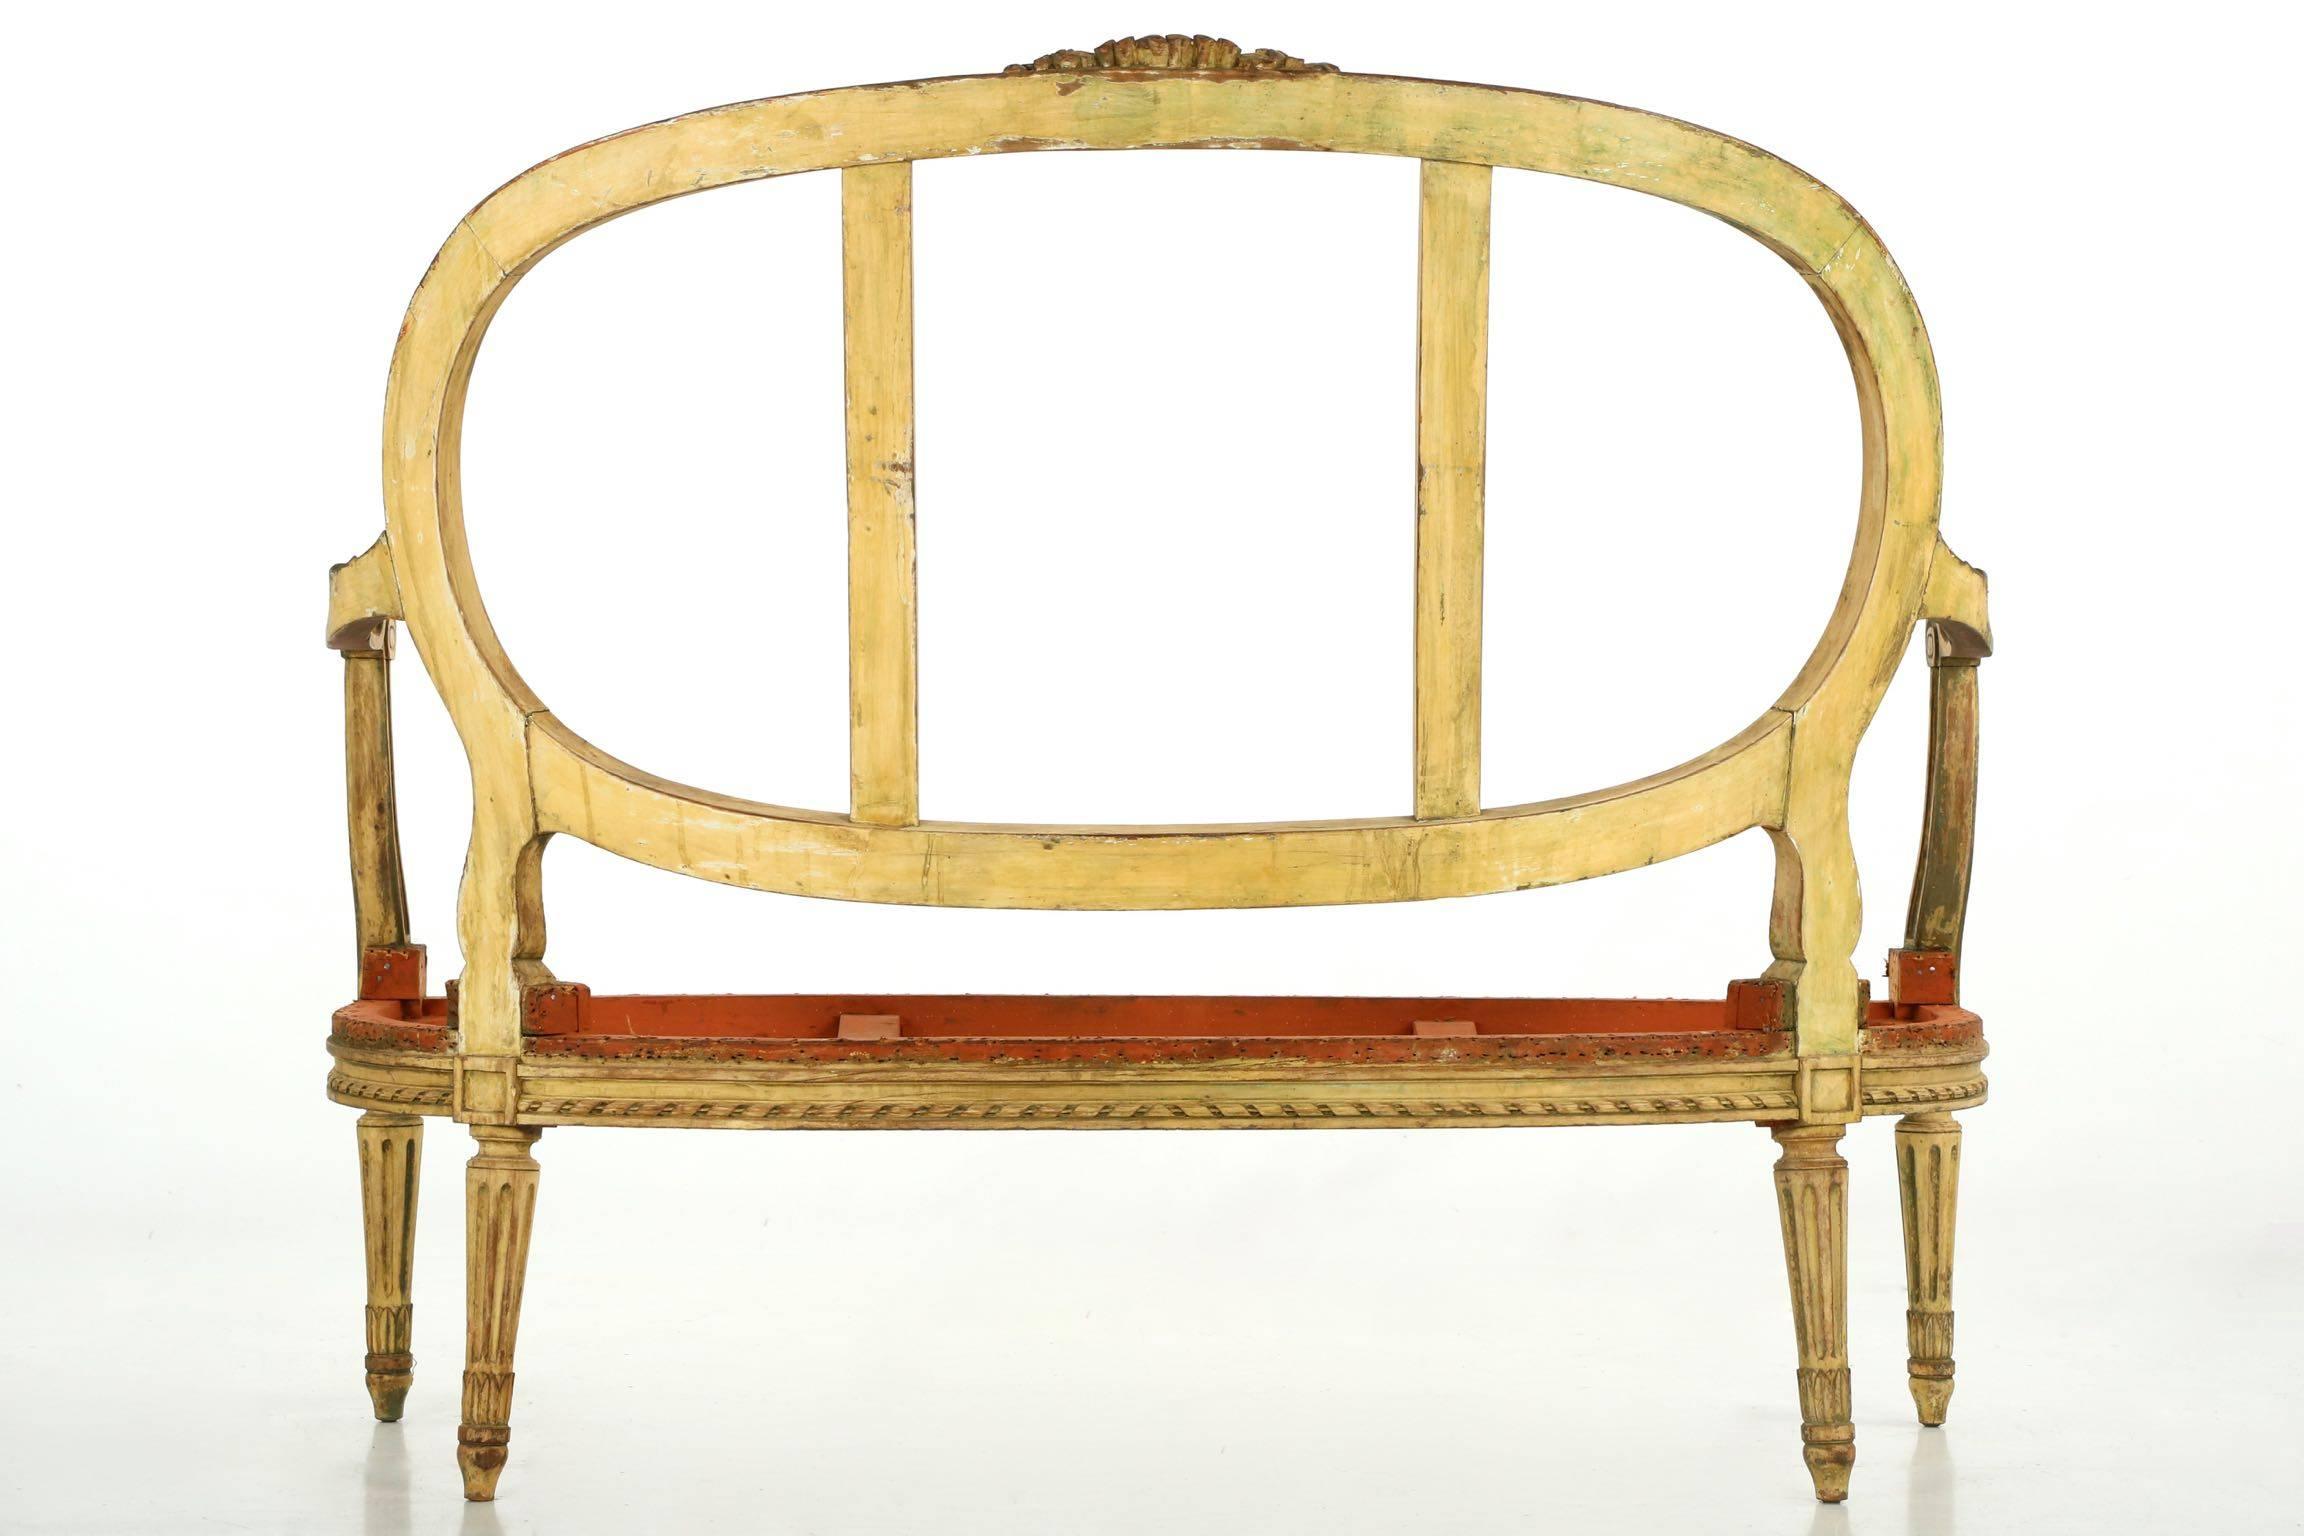 A naturally worn and distressed salon suite, the frames retain traces of original gilding with red bole peeking through the old off-white painted surfaces. Crisply carved and executed, the crest rail is an intricate display of florals over an